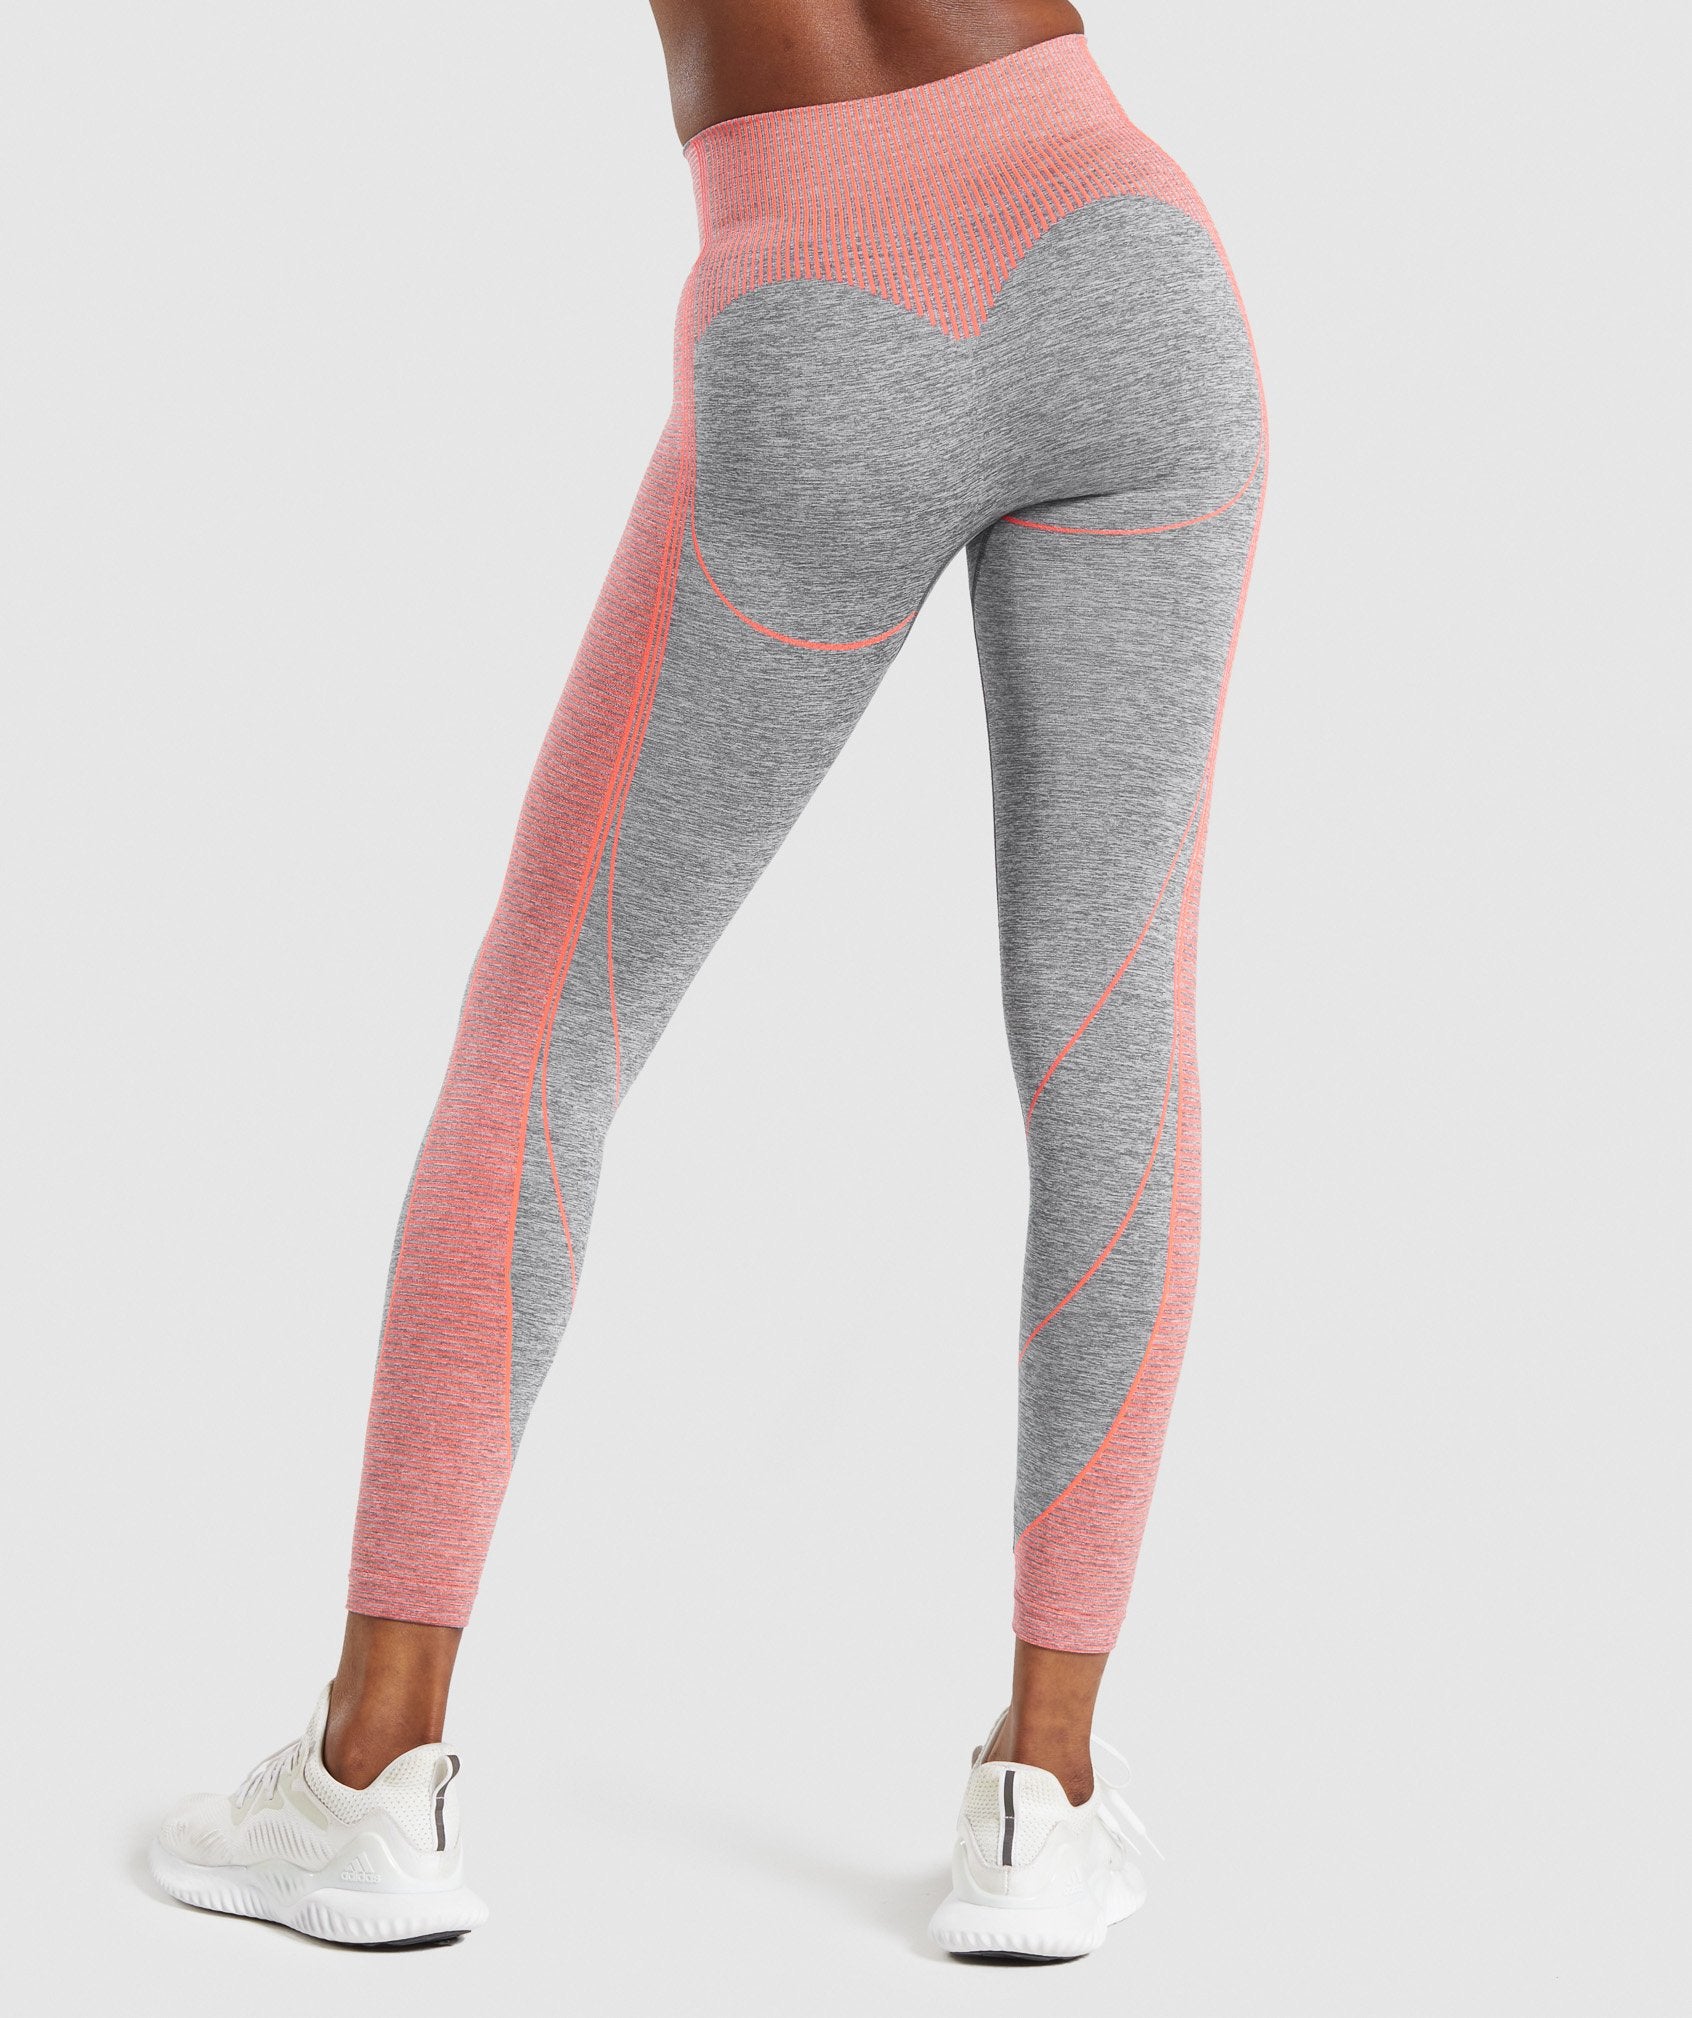 Hyper Amplify Leggings in Charcoal Marl/Coral - view 4